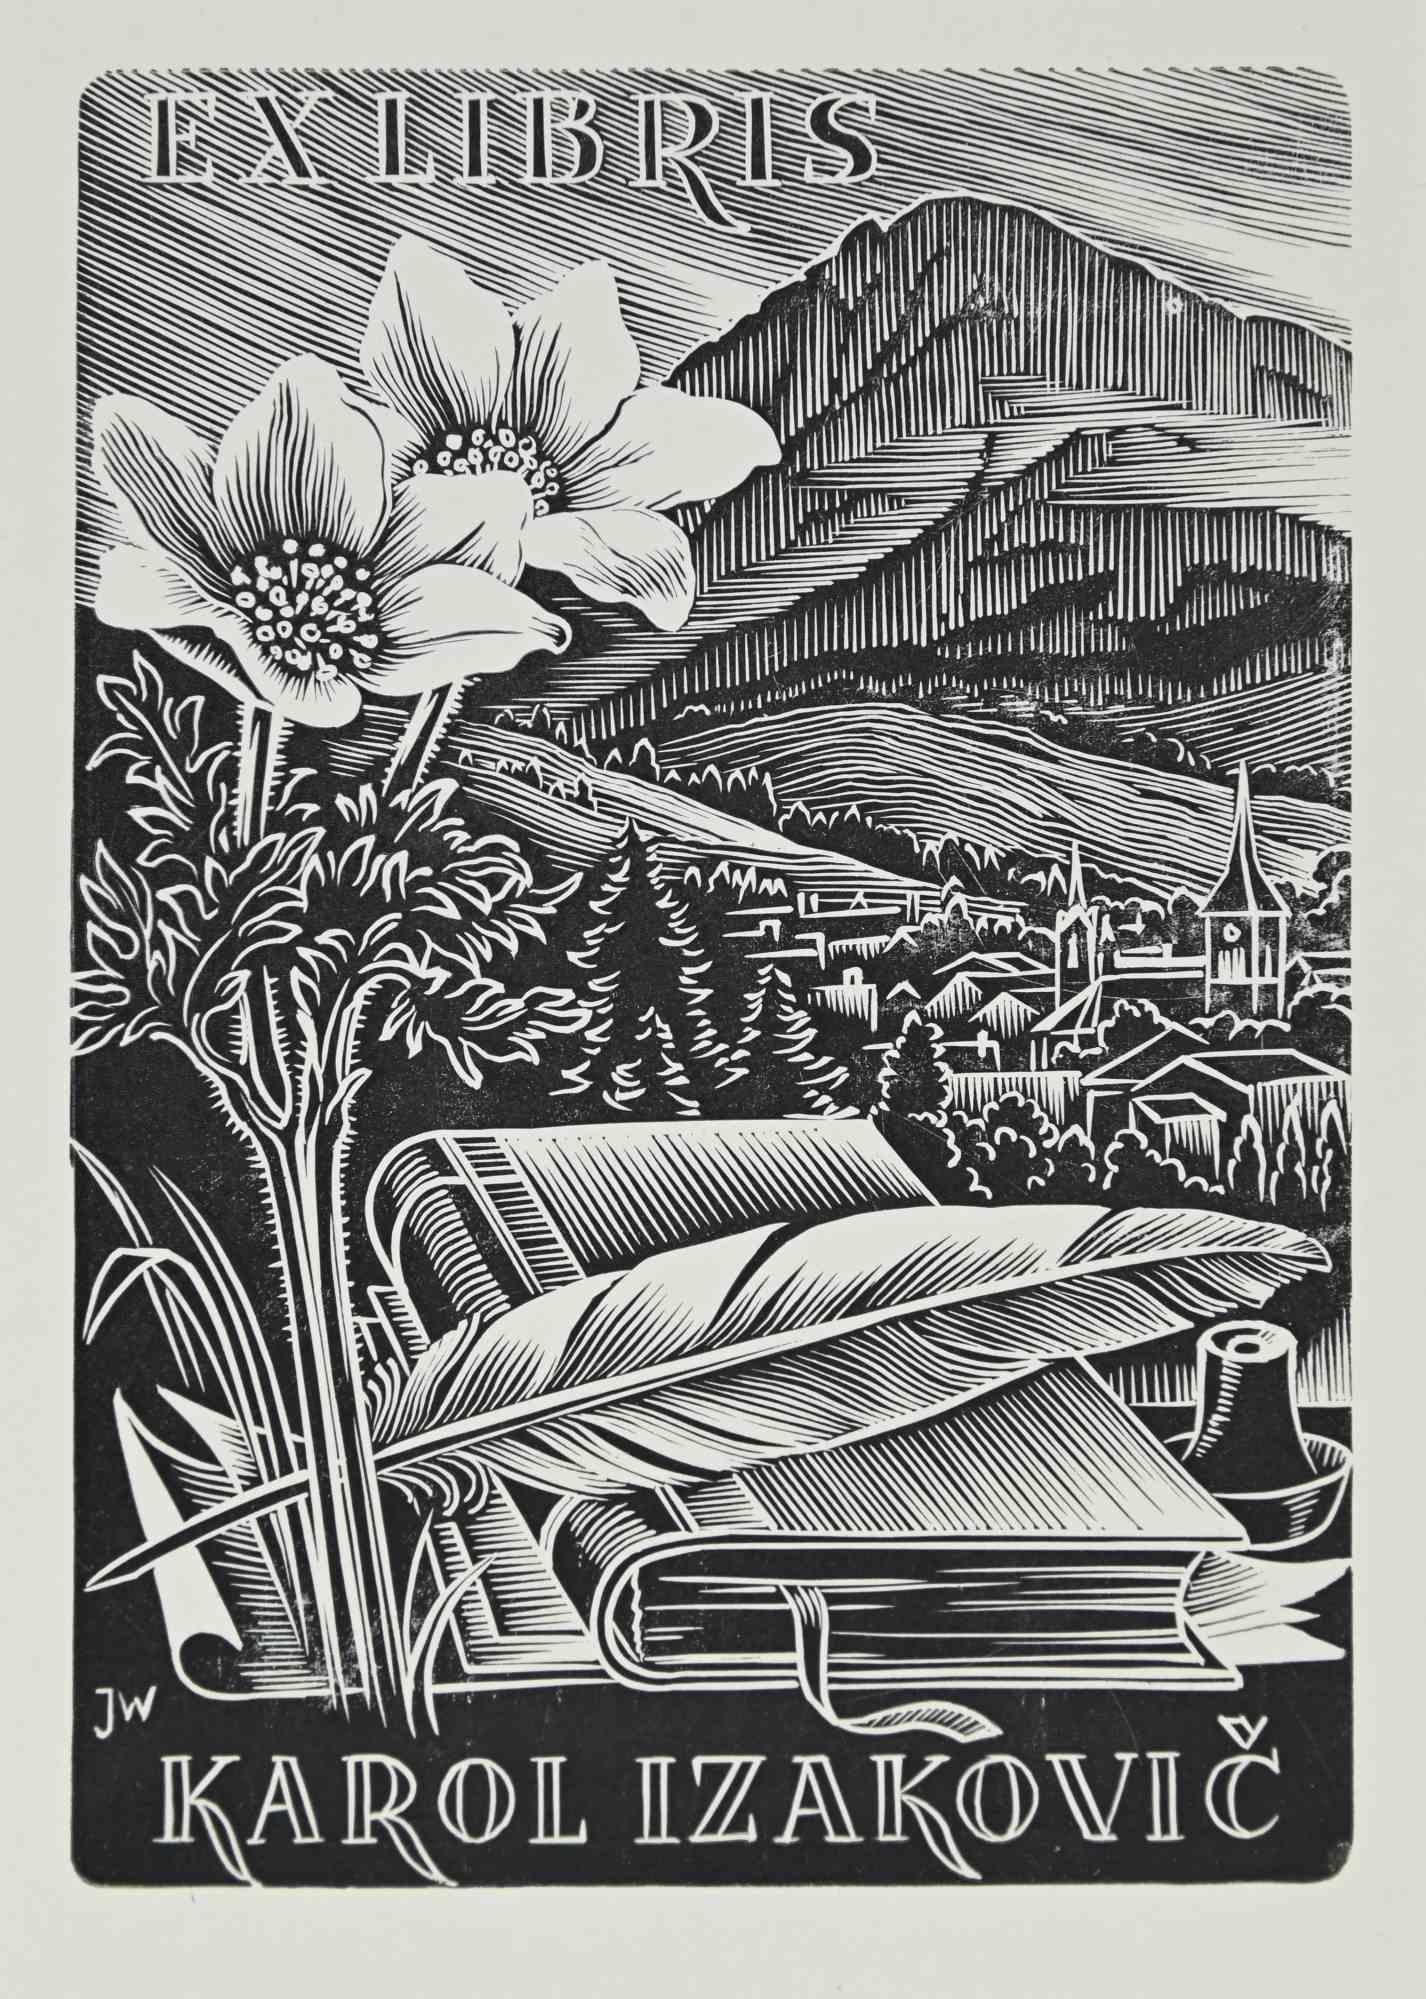 Ex Libris Karol Izakovic is an Artwork realized in 1982, by the Artist Josef Weiser (1914-1994).

Woodcut B./W. print on paper. Signed on plate and dated on back.

Good conditions.

The artist wants to define a well-balanced composition, through